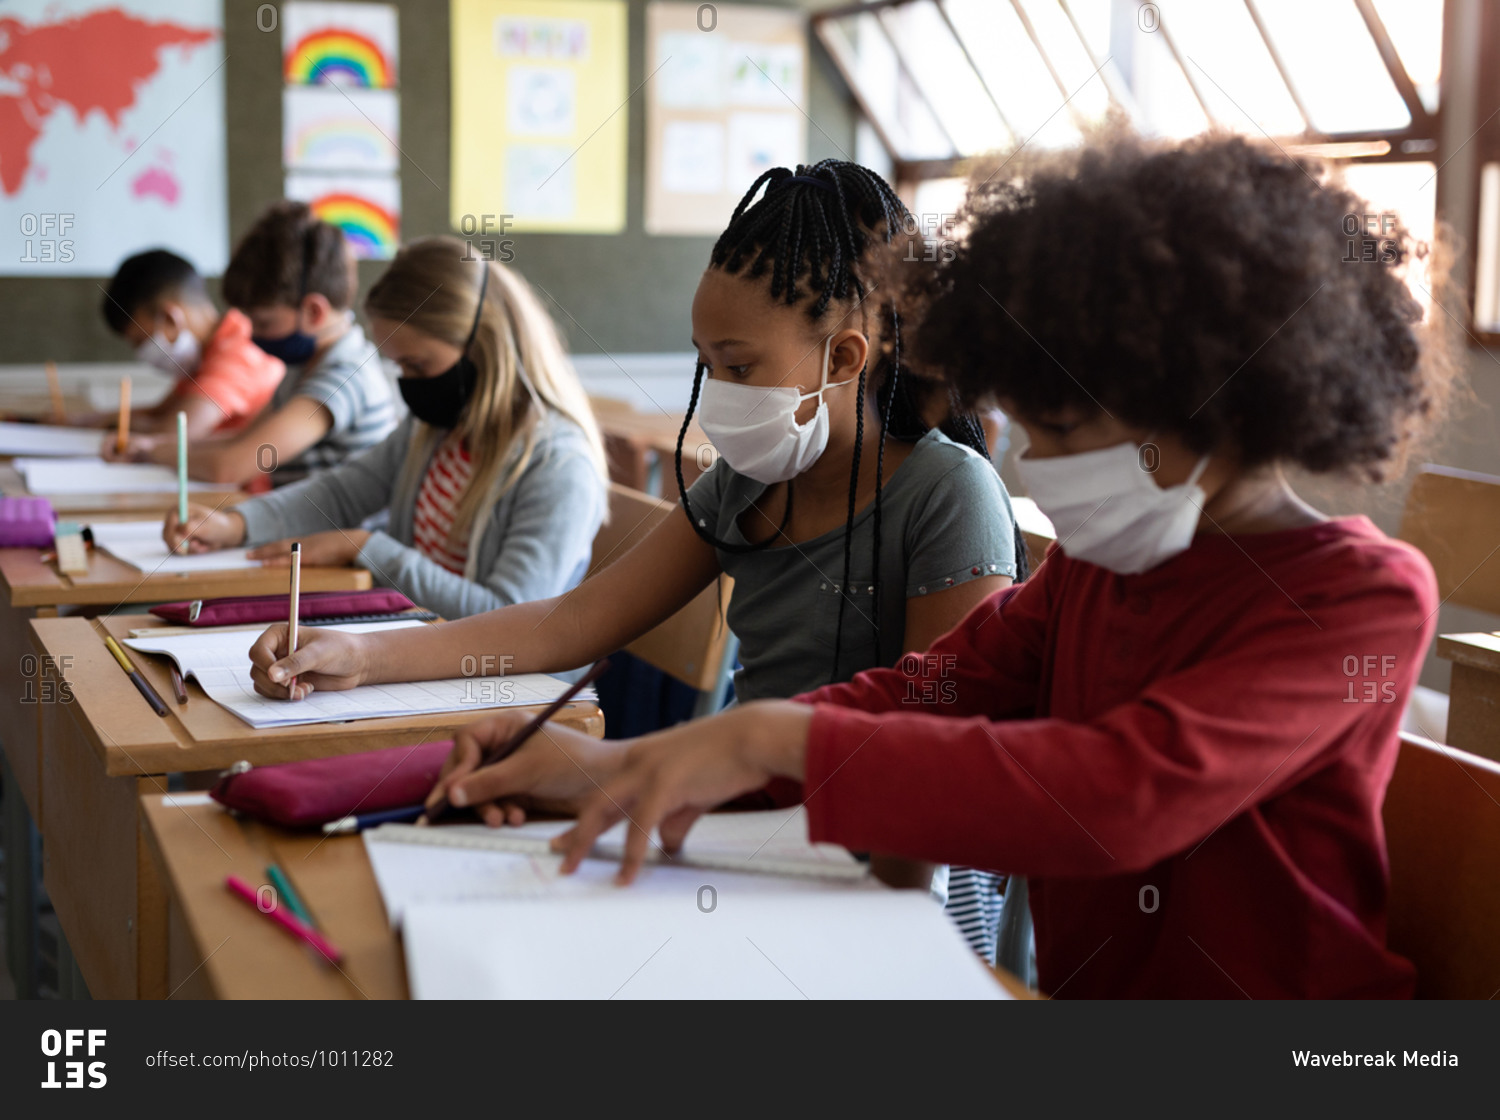 Group of multi ethnic kids wearing face masks while studying in classroom at school. Primary education social distancing health safety during Covid19 Coronavirus pandemic.